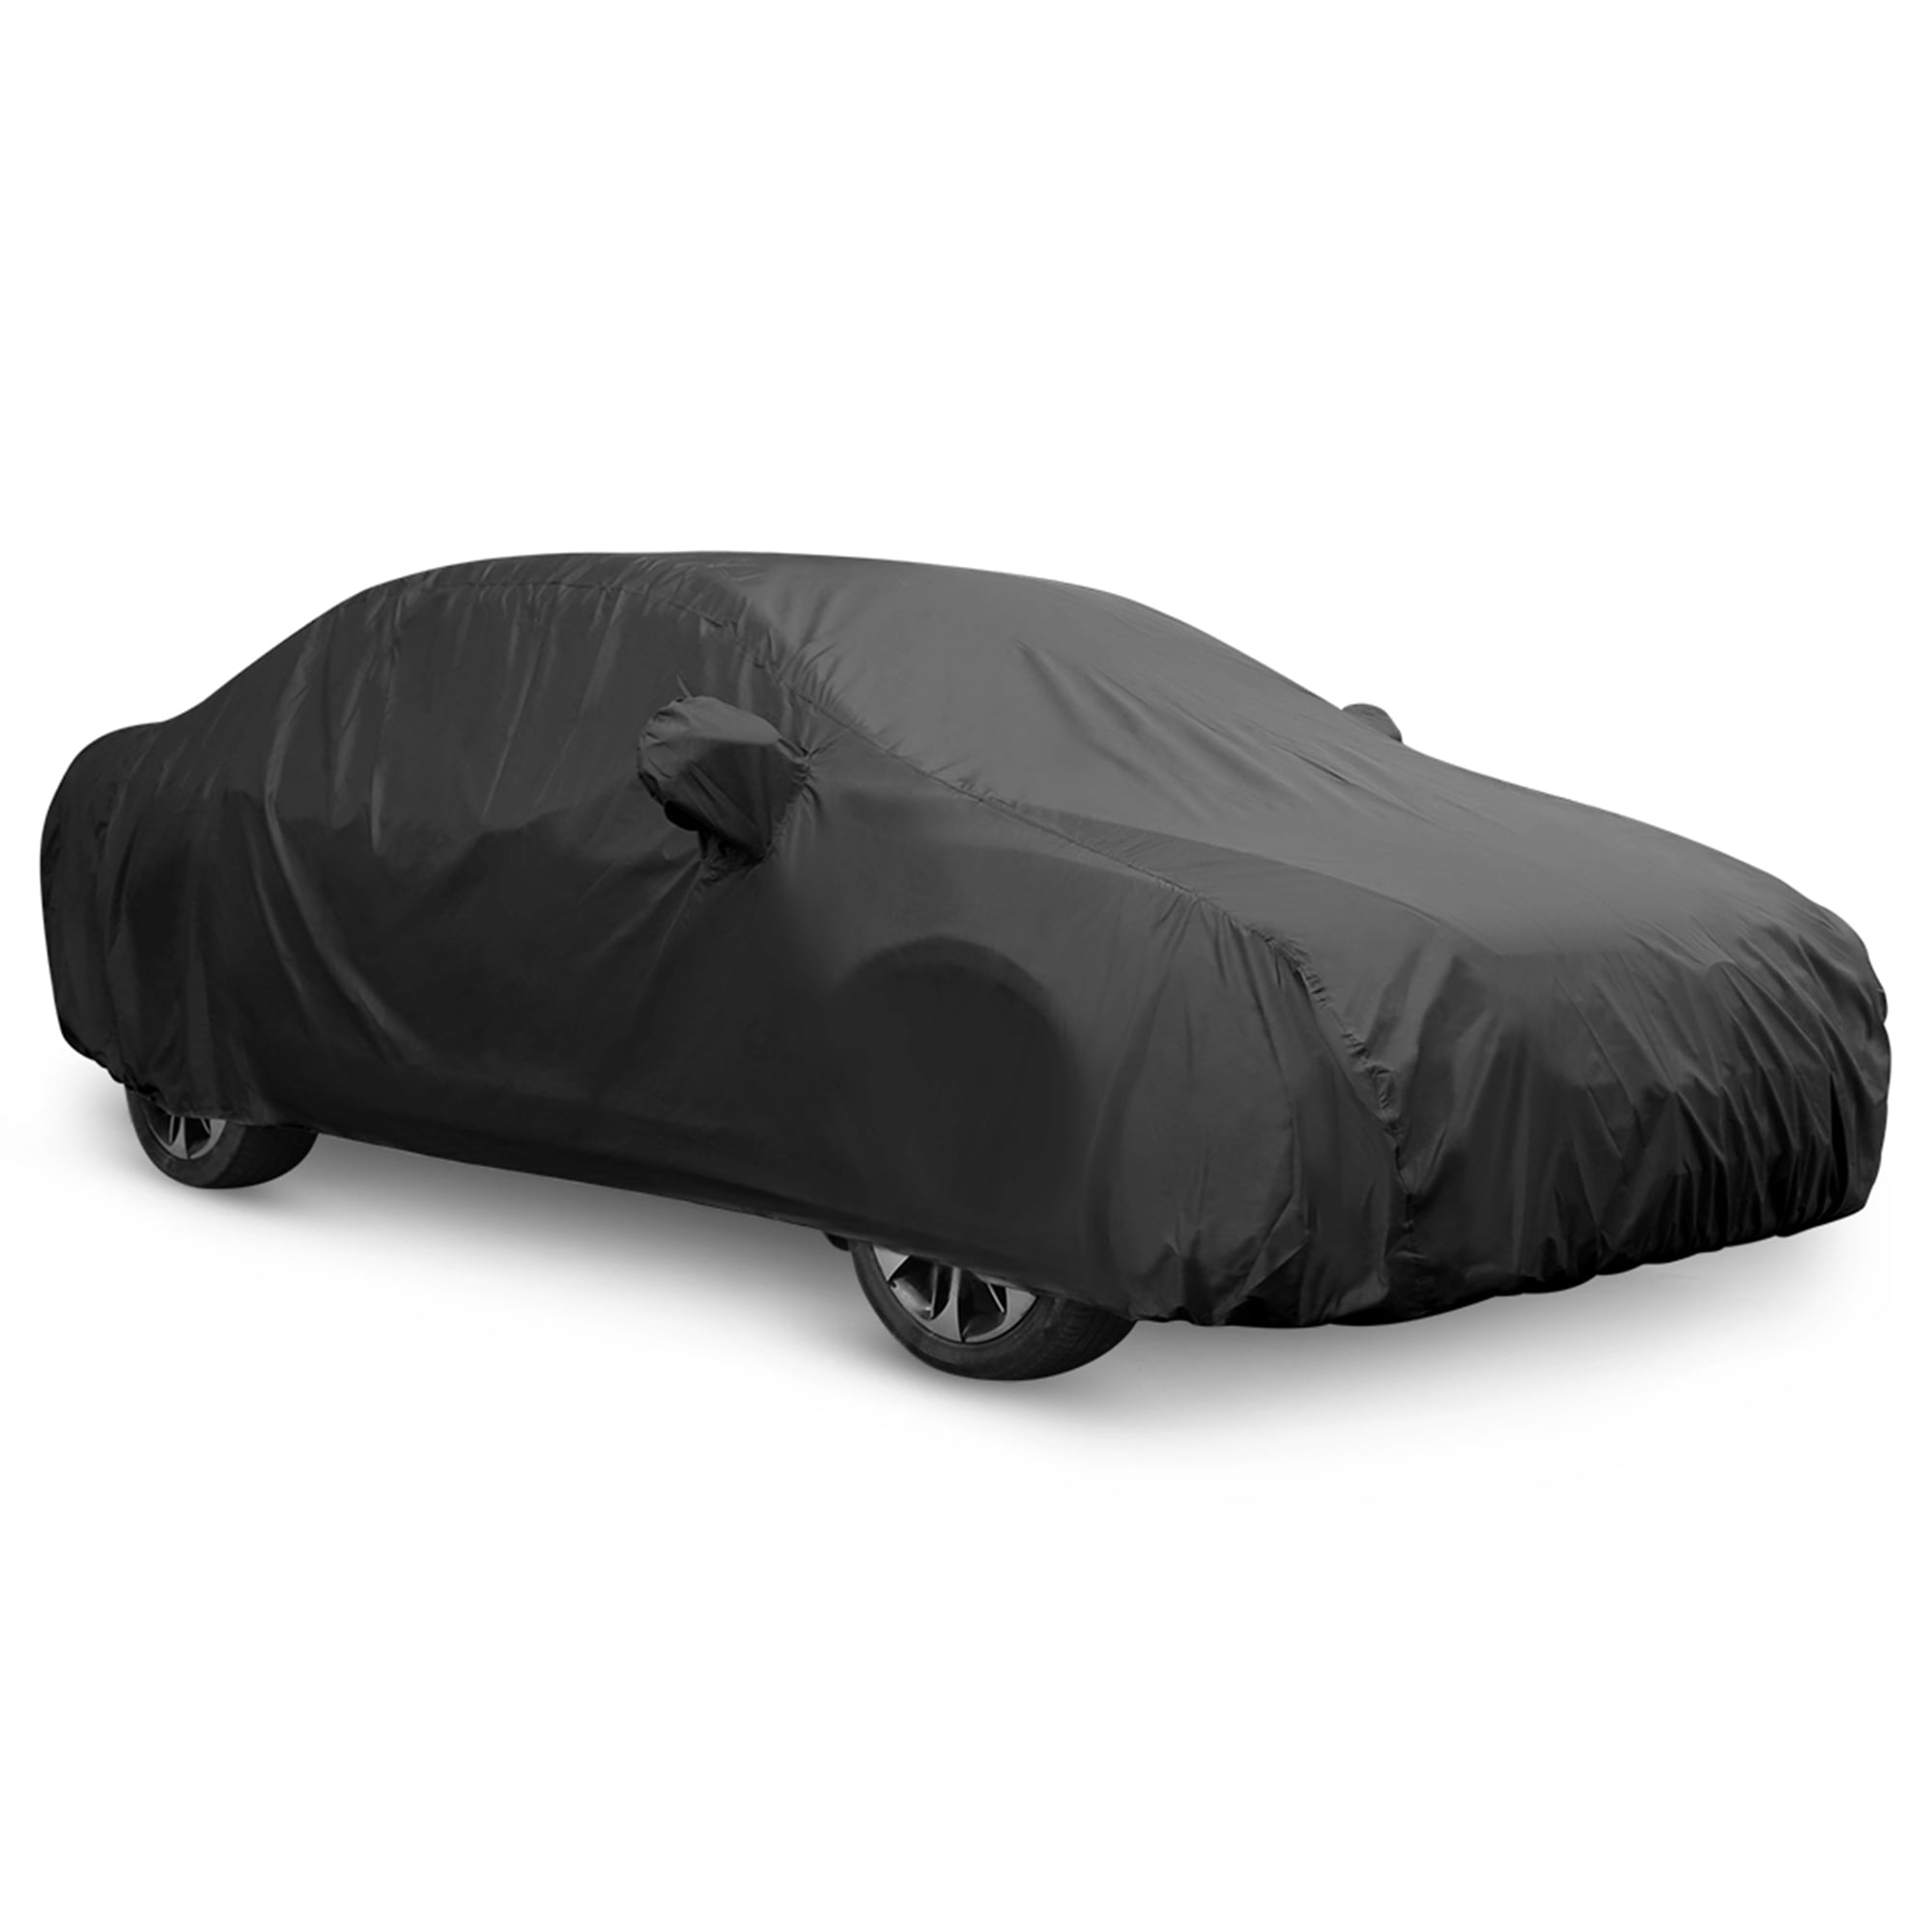 Vehicle Dust Cover